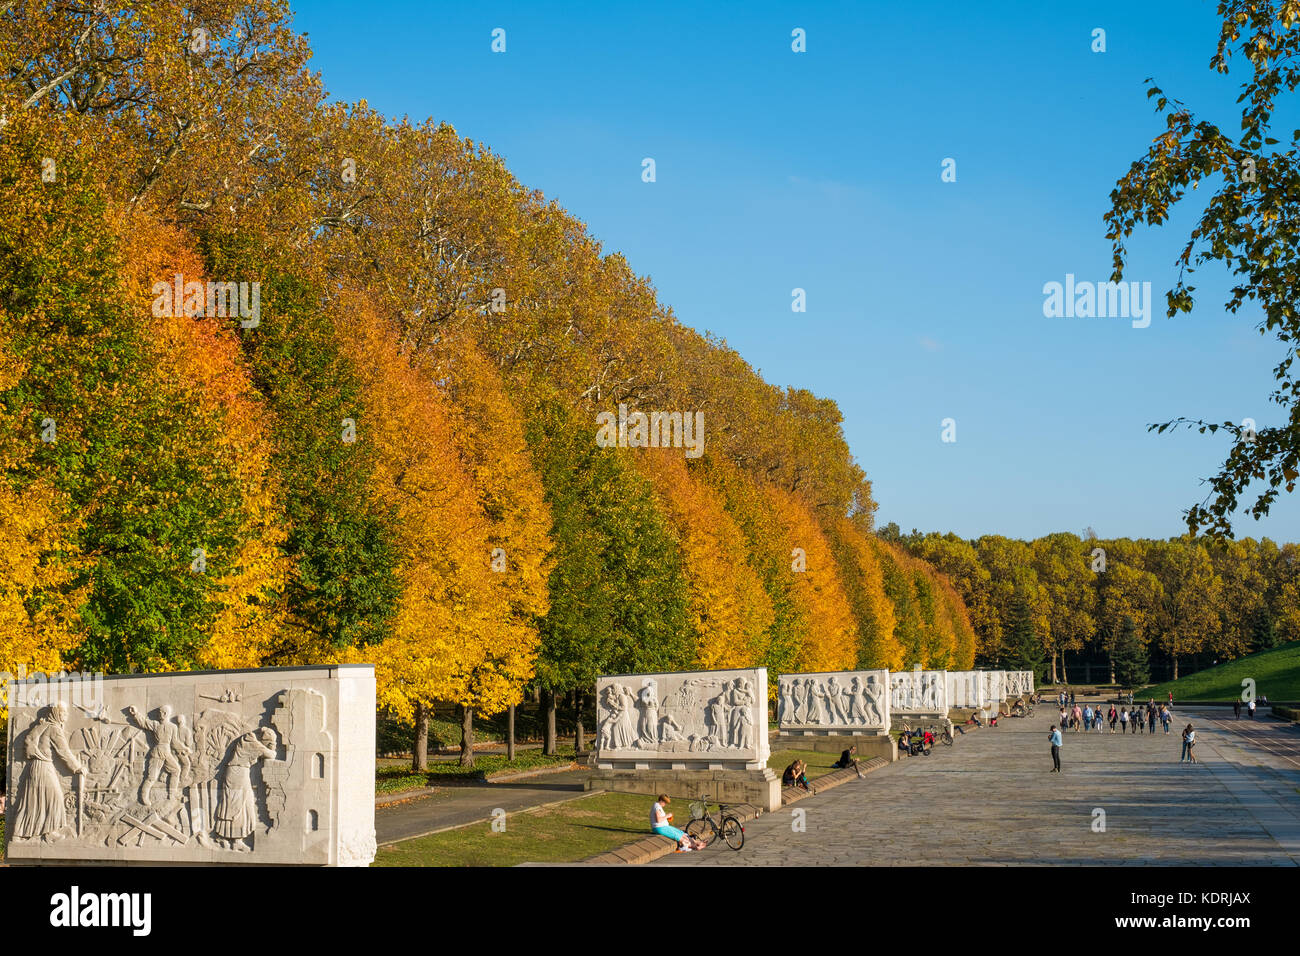 Berlin, Germany - october 2017: People at the Soviet War Memorial and military cemetery during autumn in Berlin's Treptower Park Stock Photo